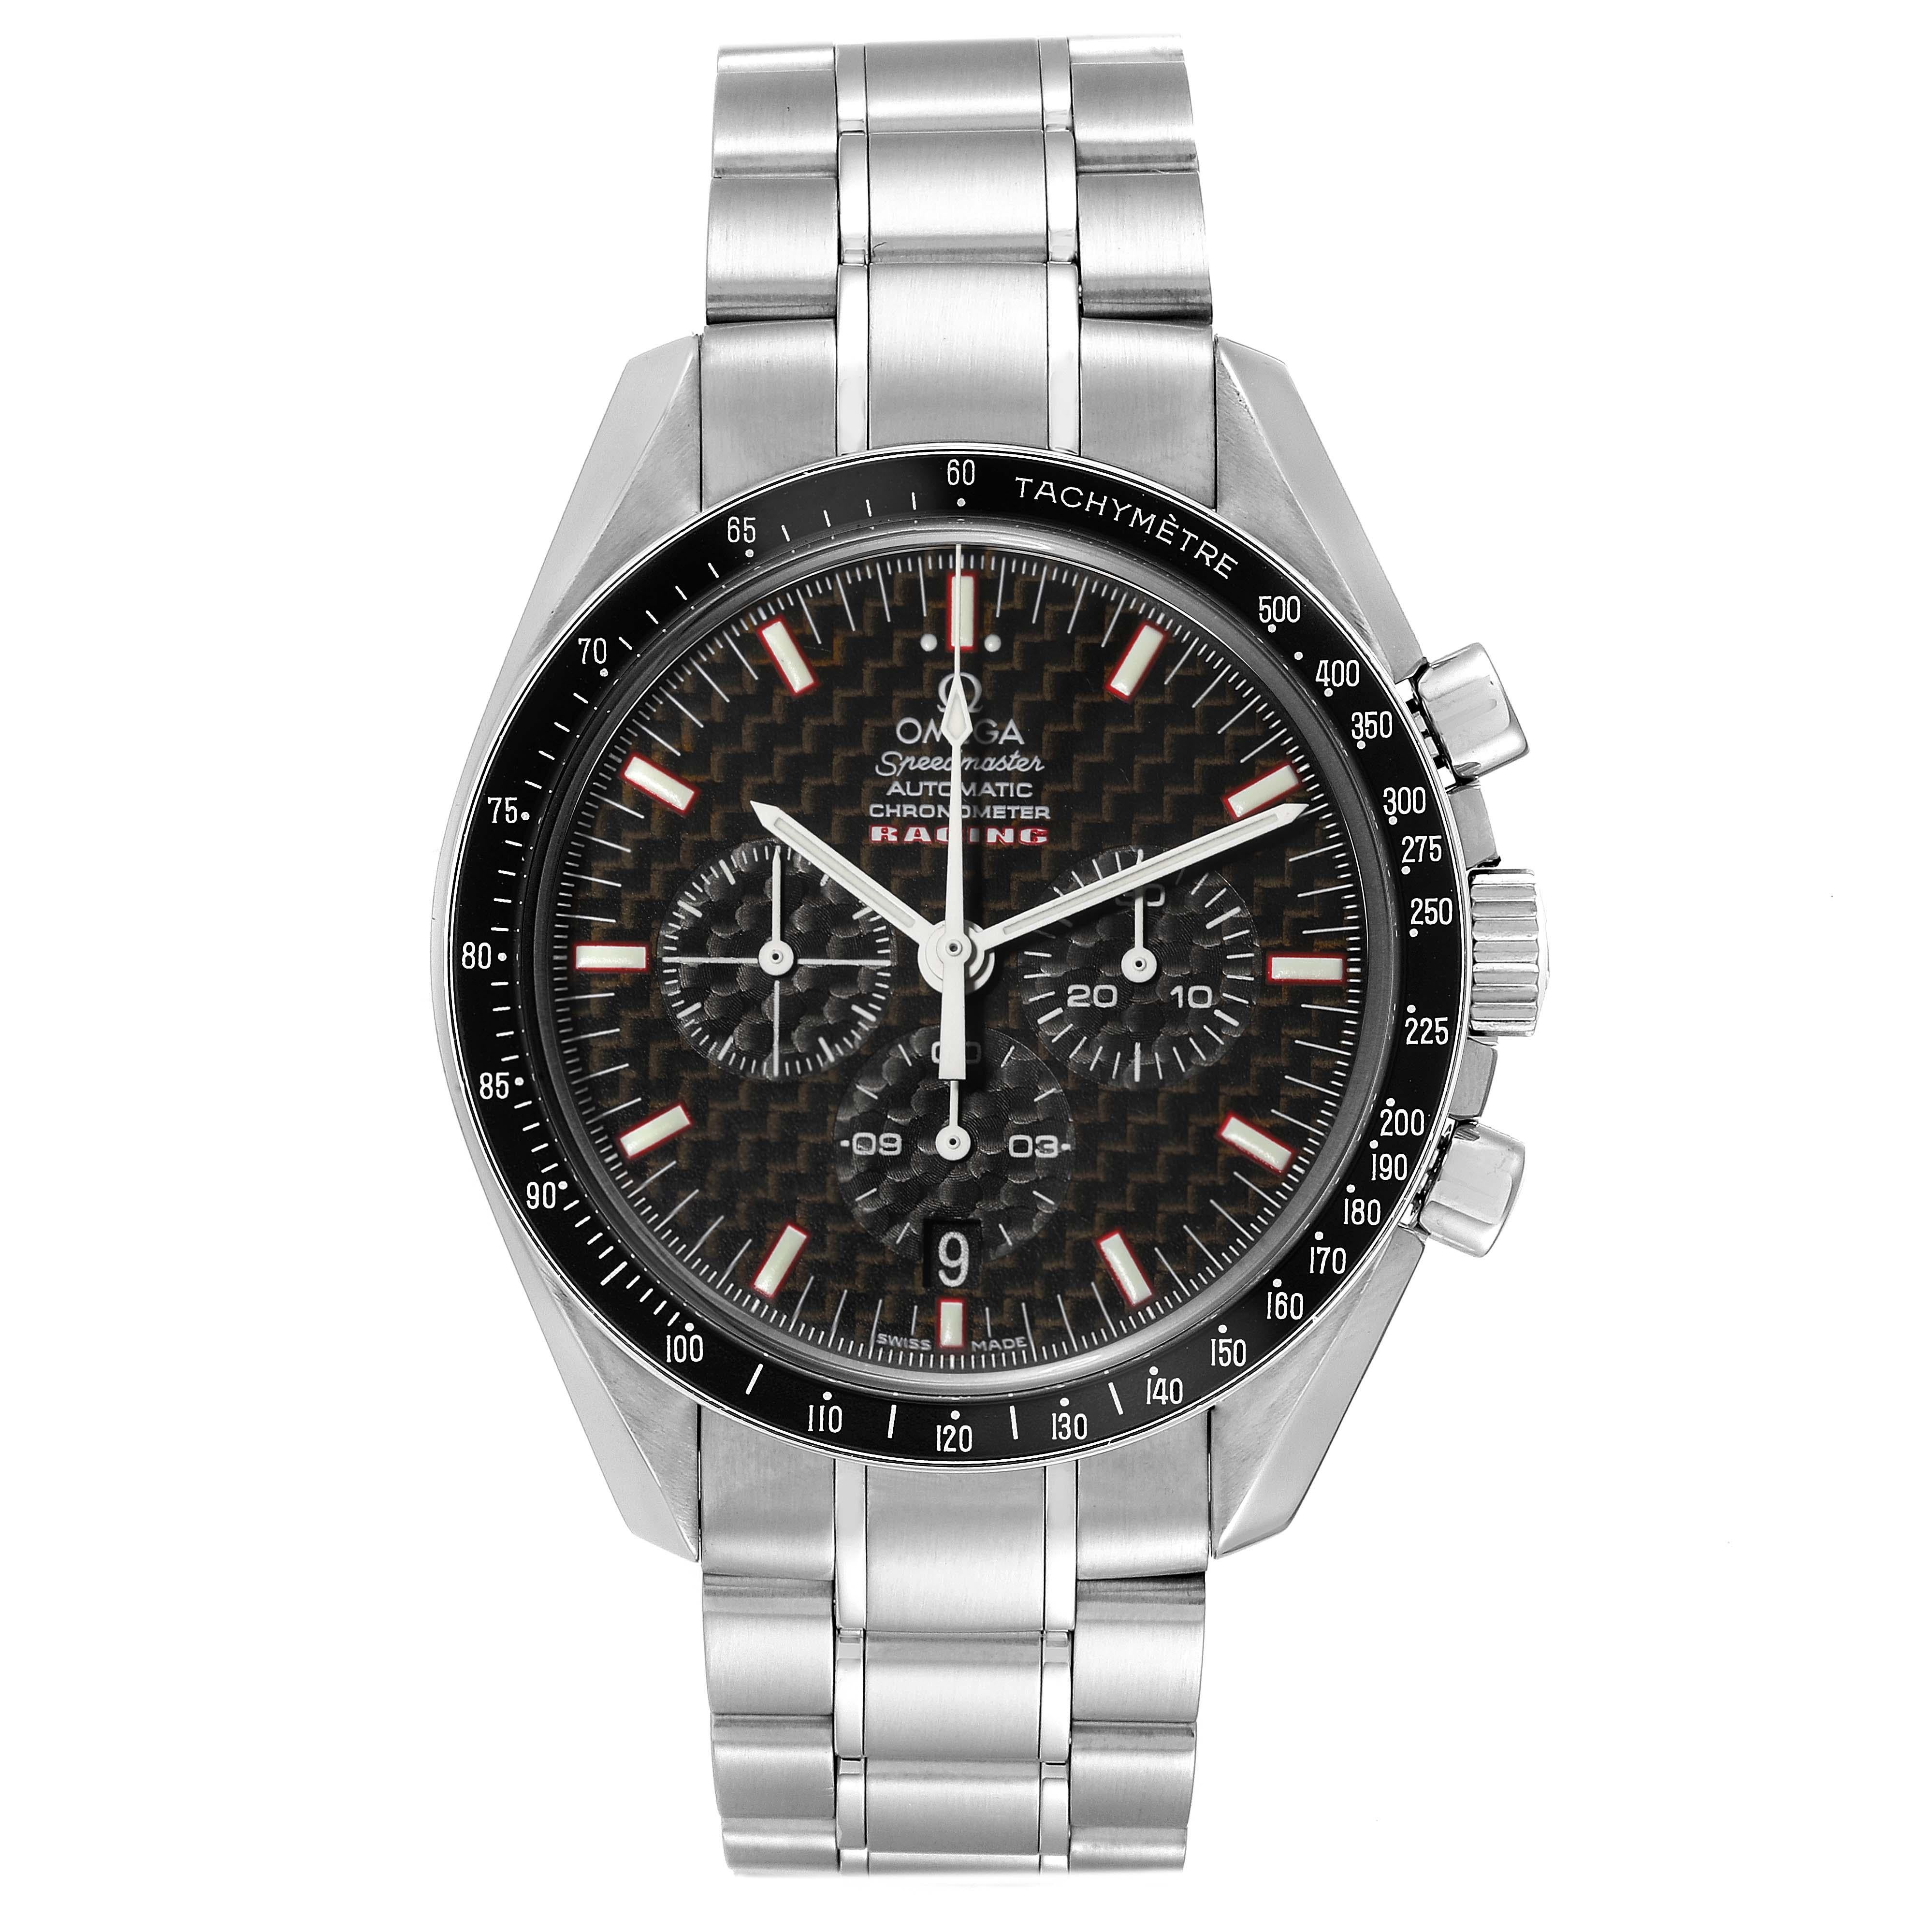 Omega Speedmaster Professional Racing Steel Mens Watch 3552.59.00 Box Card. Automatic self-winding chronograph movement. Stainless steel round case 42.0 mm in diameter. Black bezel with tachymeter function. Scratch resistant sapphire crystal. Black